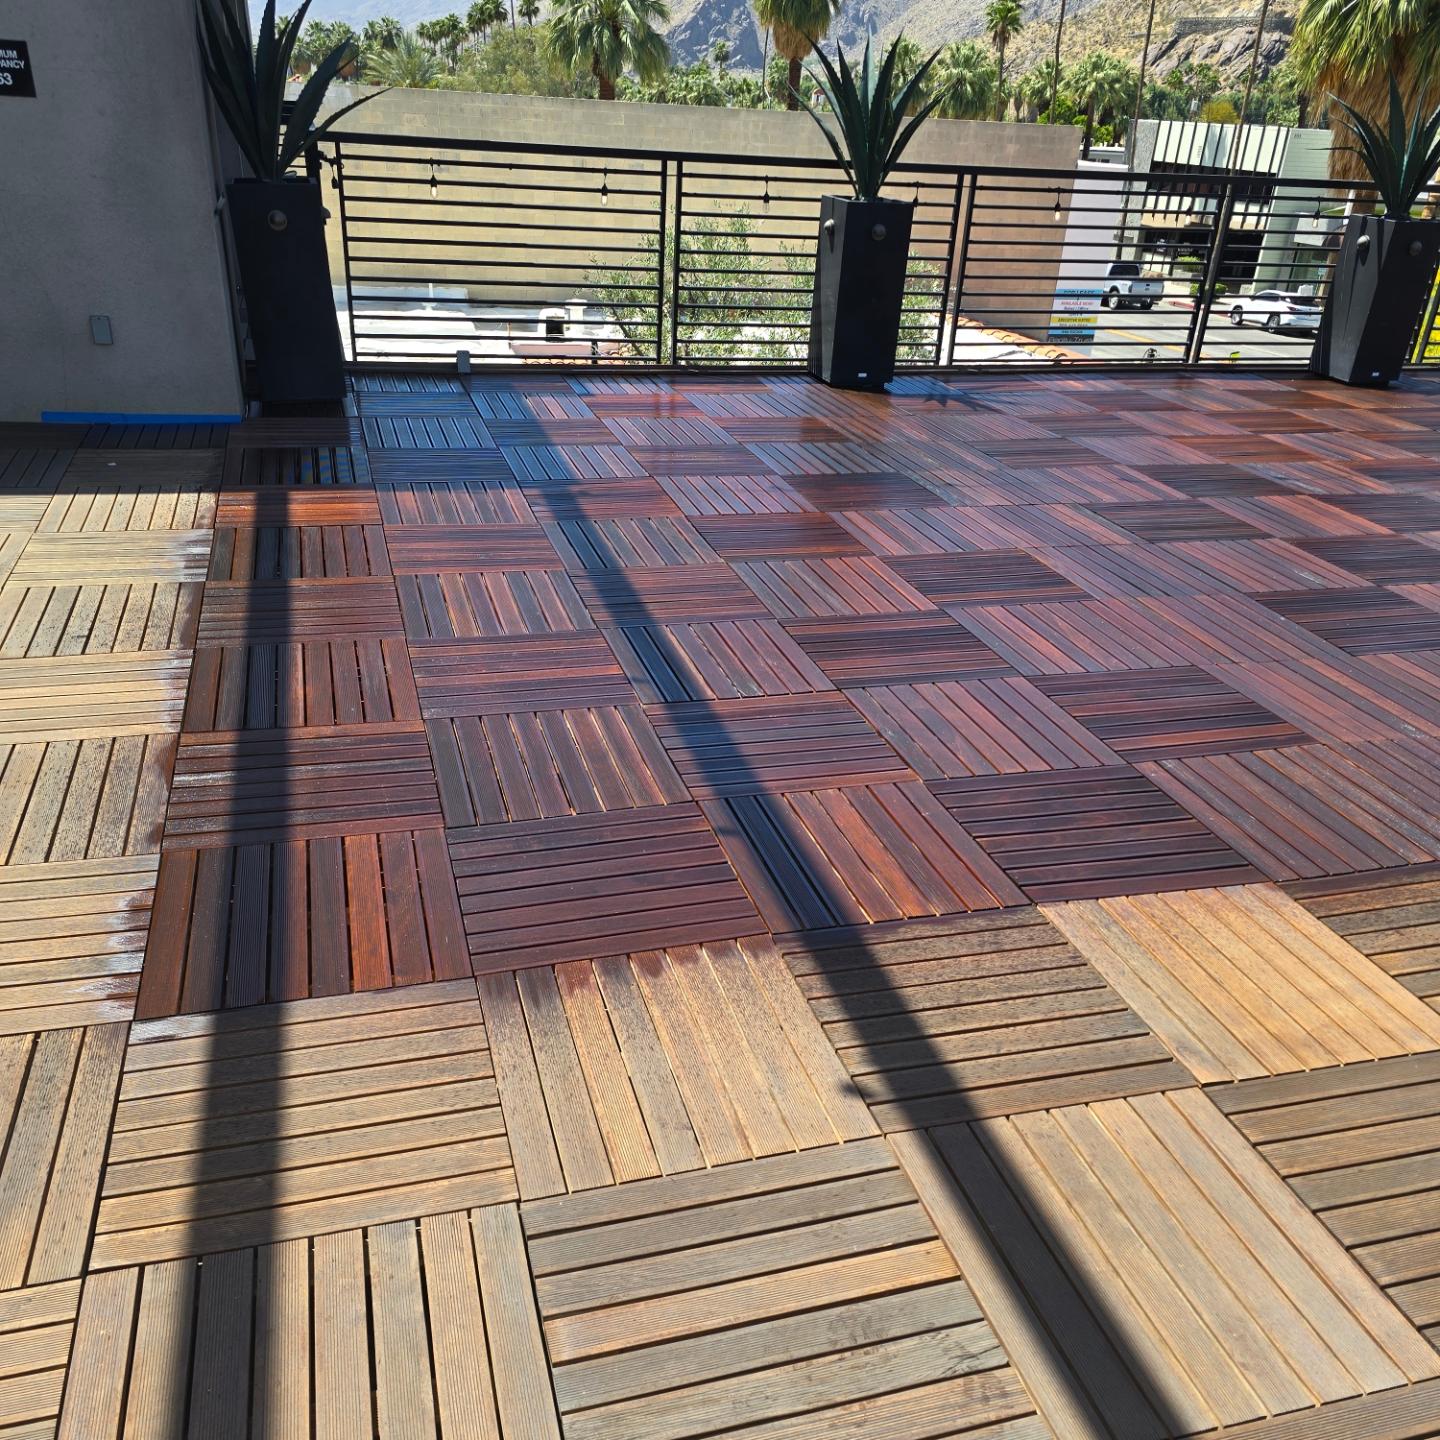 Top quality deck staining in Palm springs, Ca